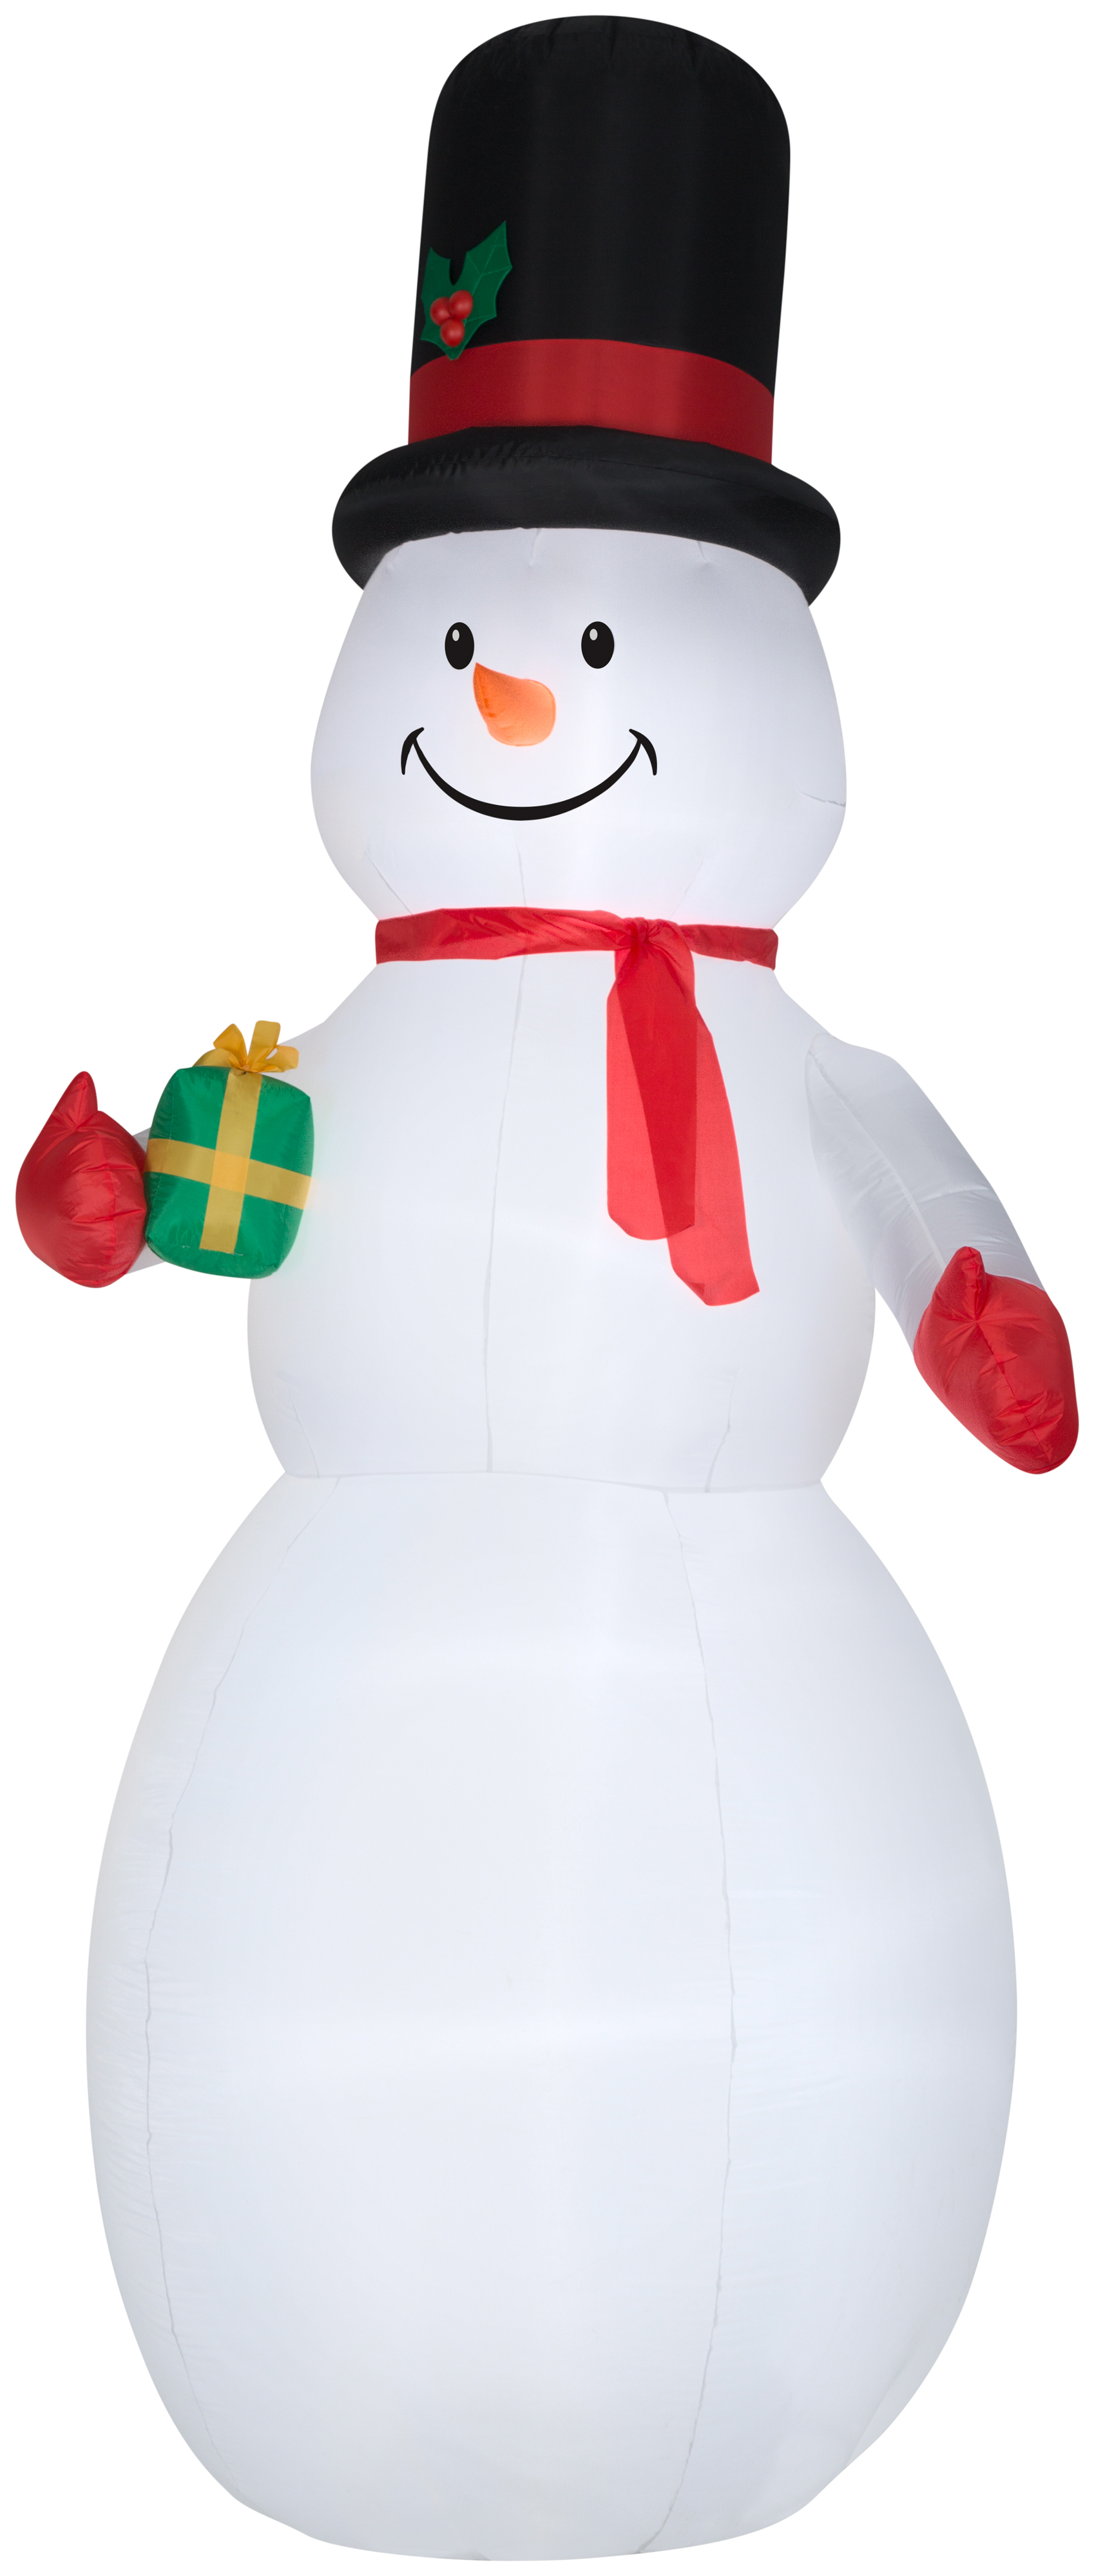 Holiday Time Yard Inflatables Snowman , 10 ft - image 1 of 5